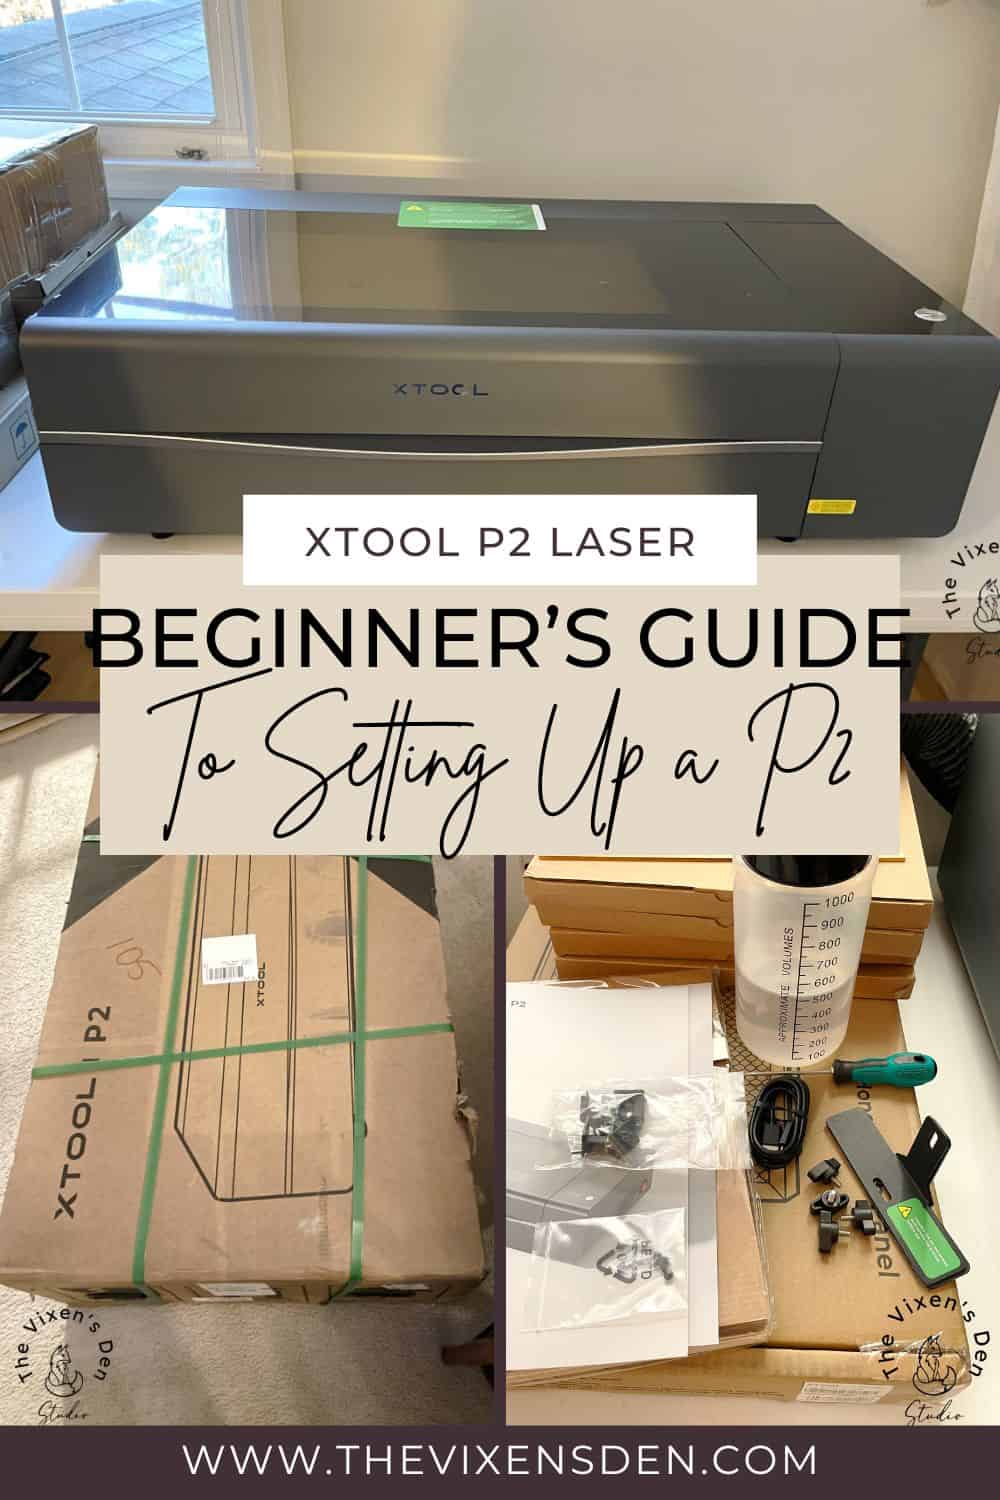 Xtool p laser beginner's guide to setting up a p.